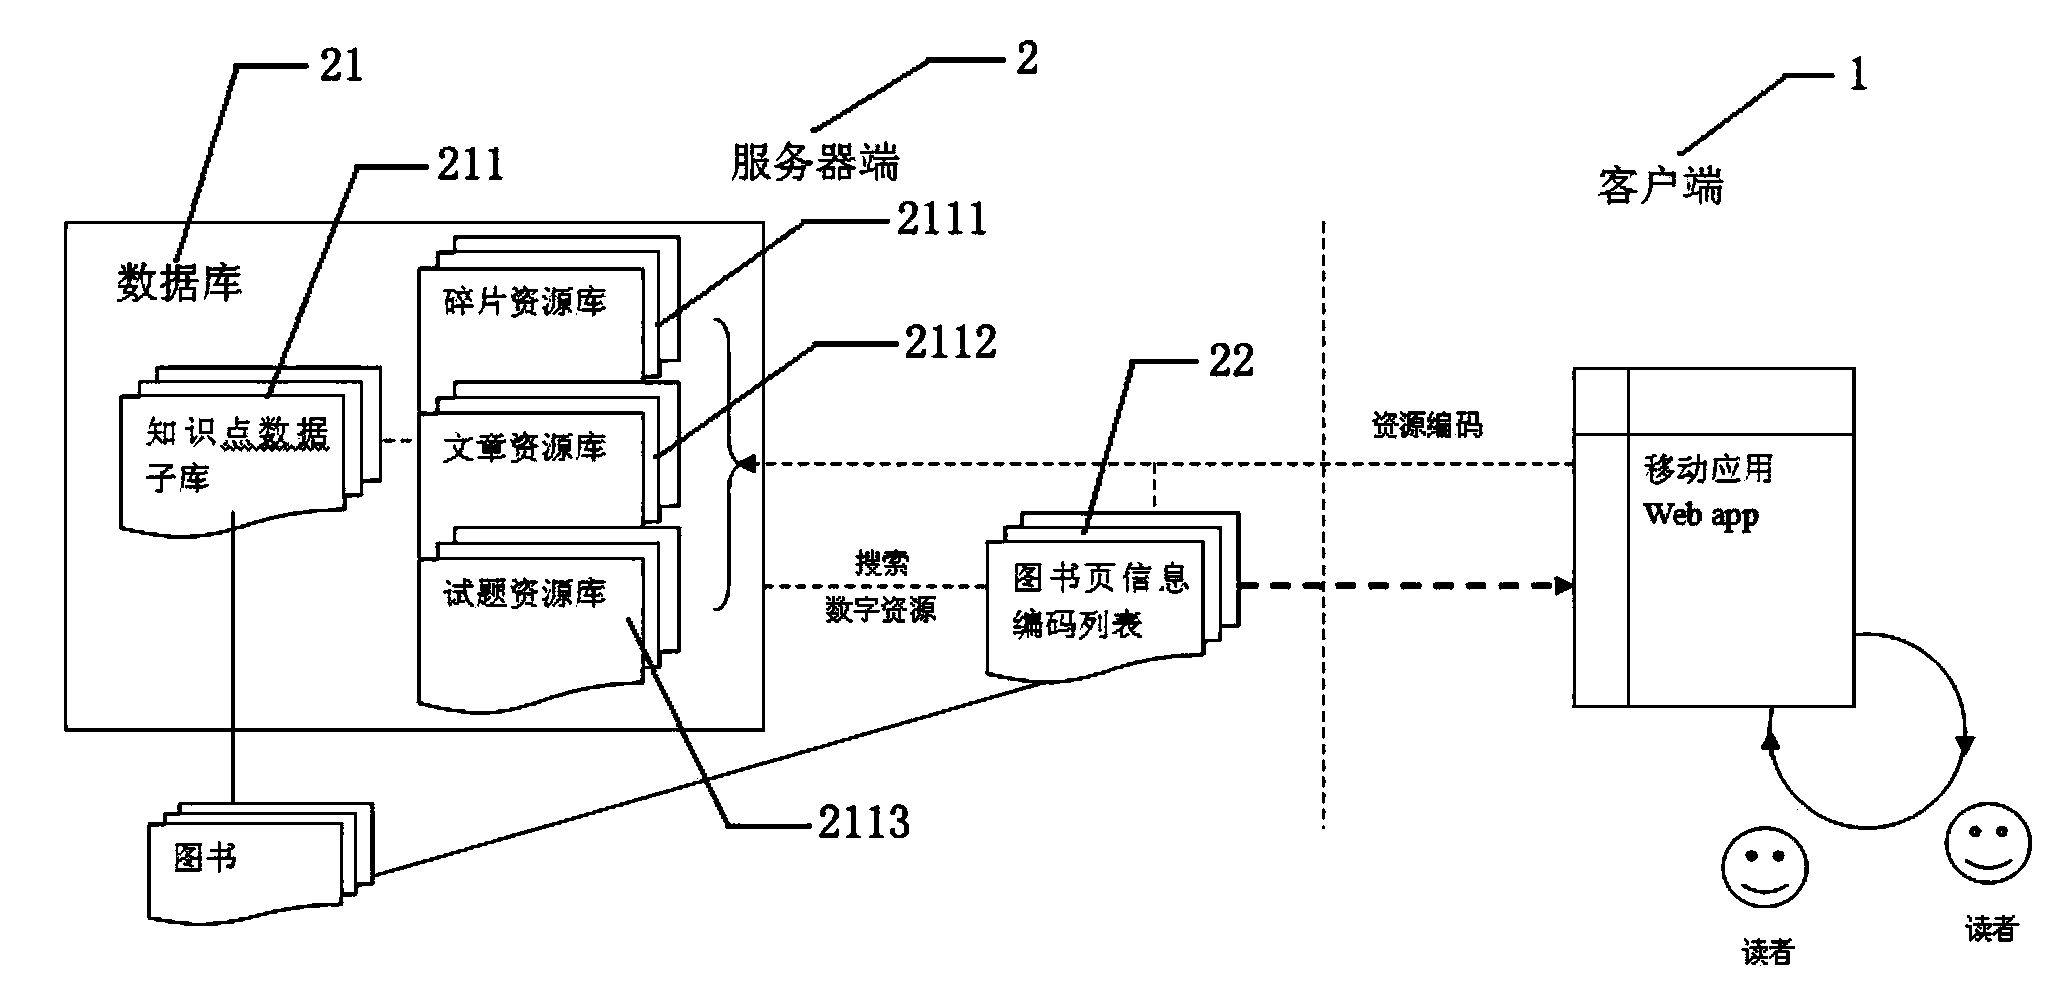 Digitalized book auxiliary reading system based on Internet, and method thereof